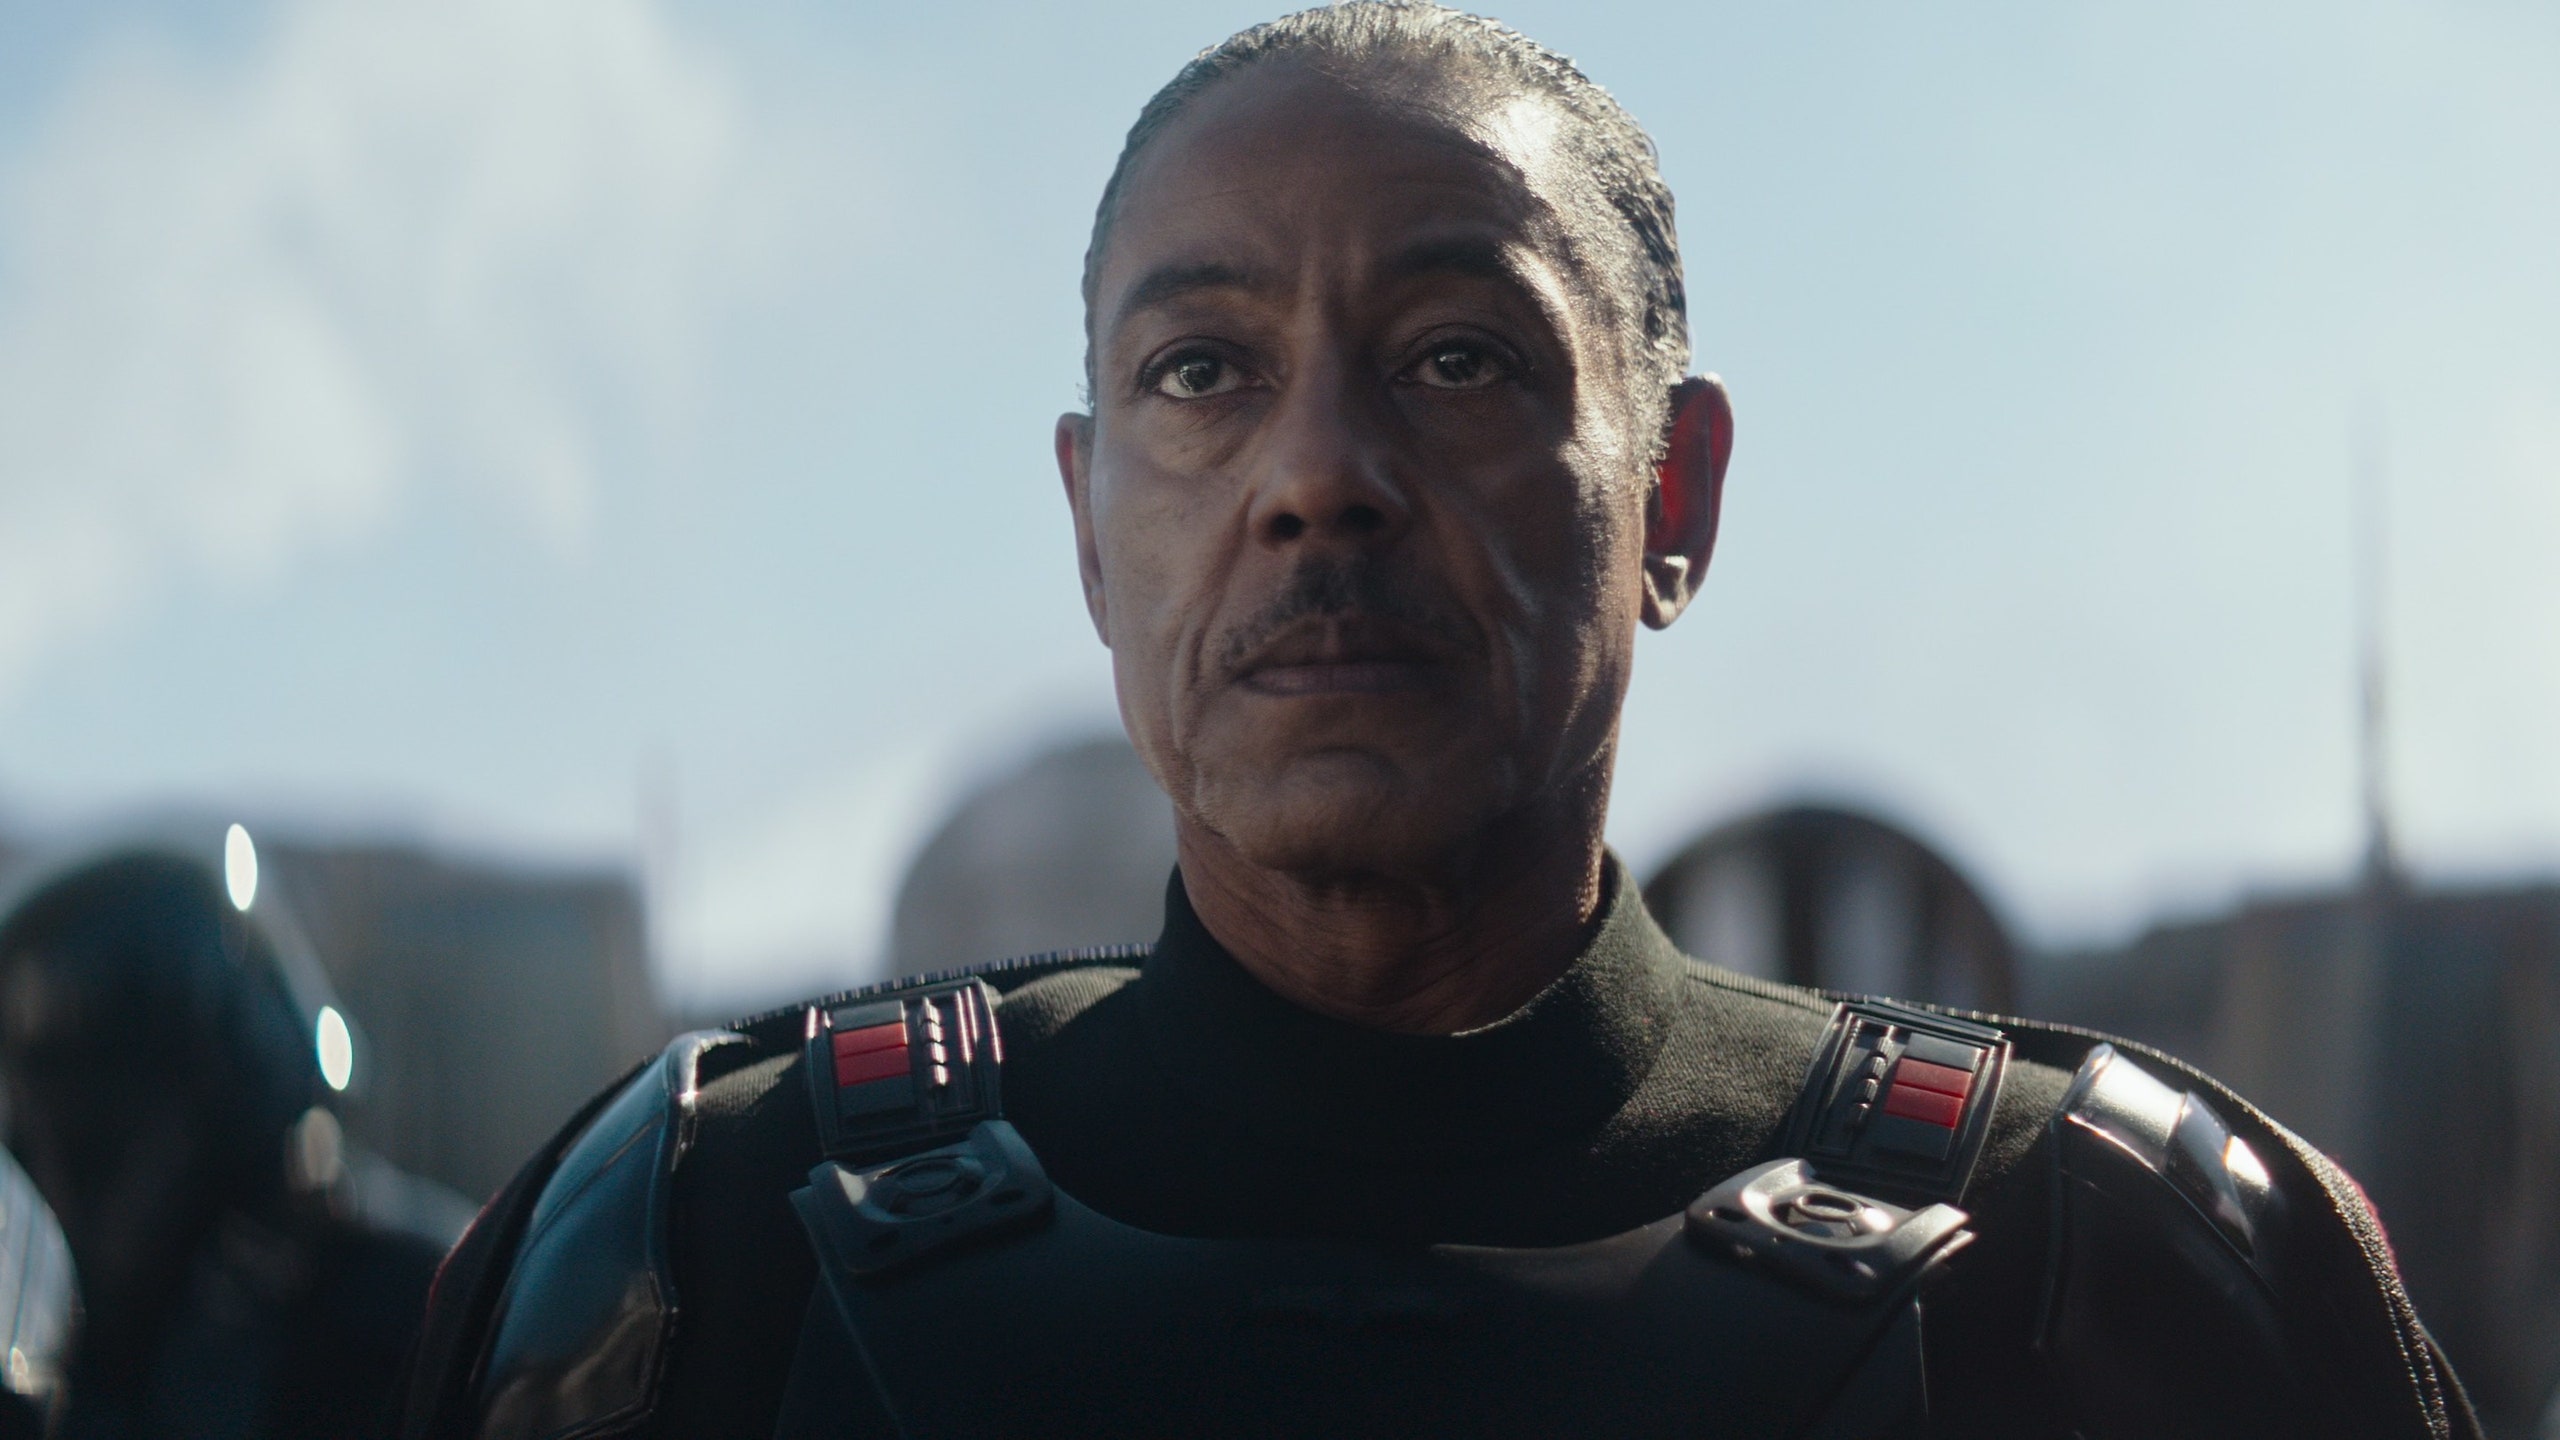 The Mandalorian Season Finale: What Is the Darksaber?